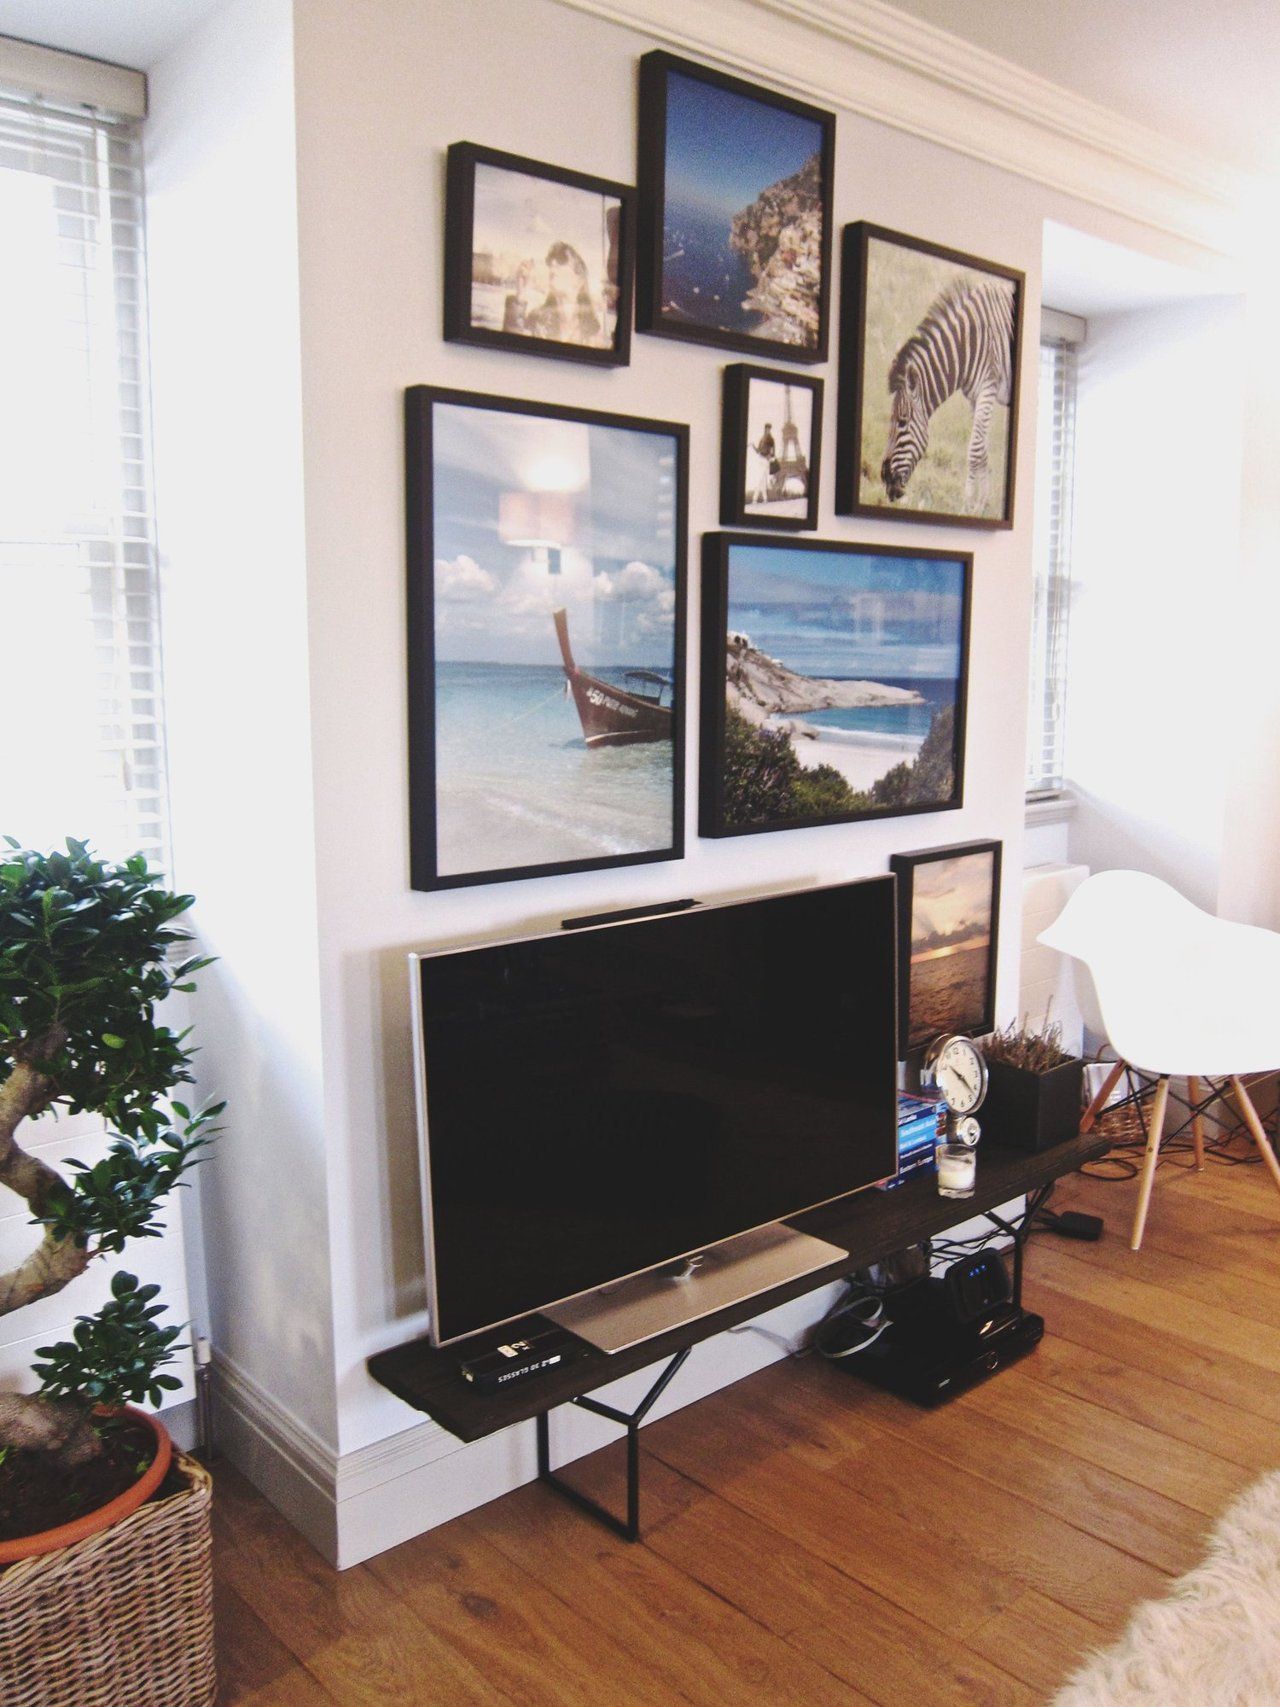 Alison's Sophisticated And Posh London Home | Home, House For Skinny Tv Stands (View 4 of 15)